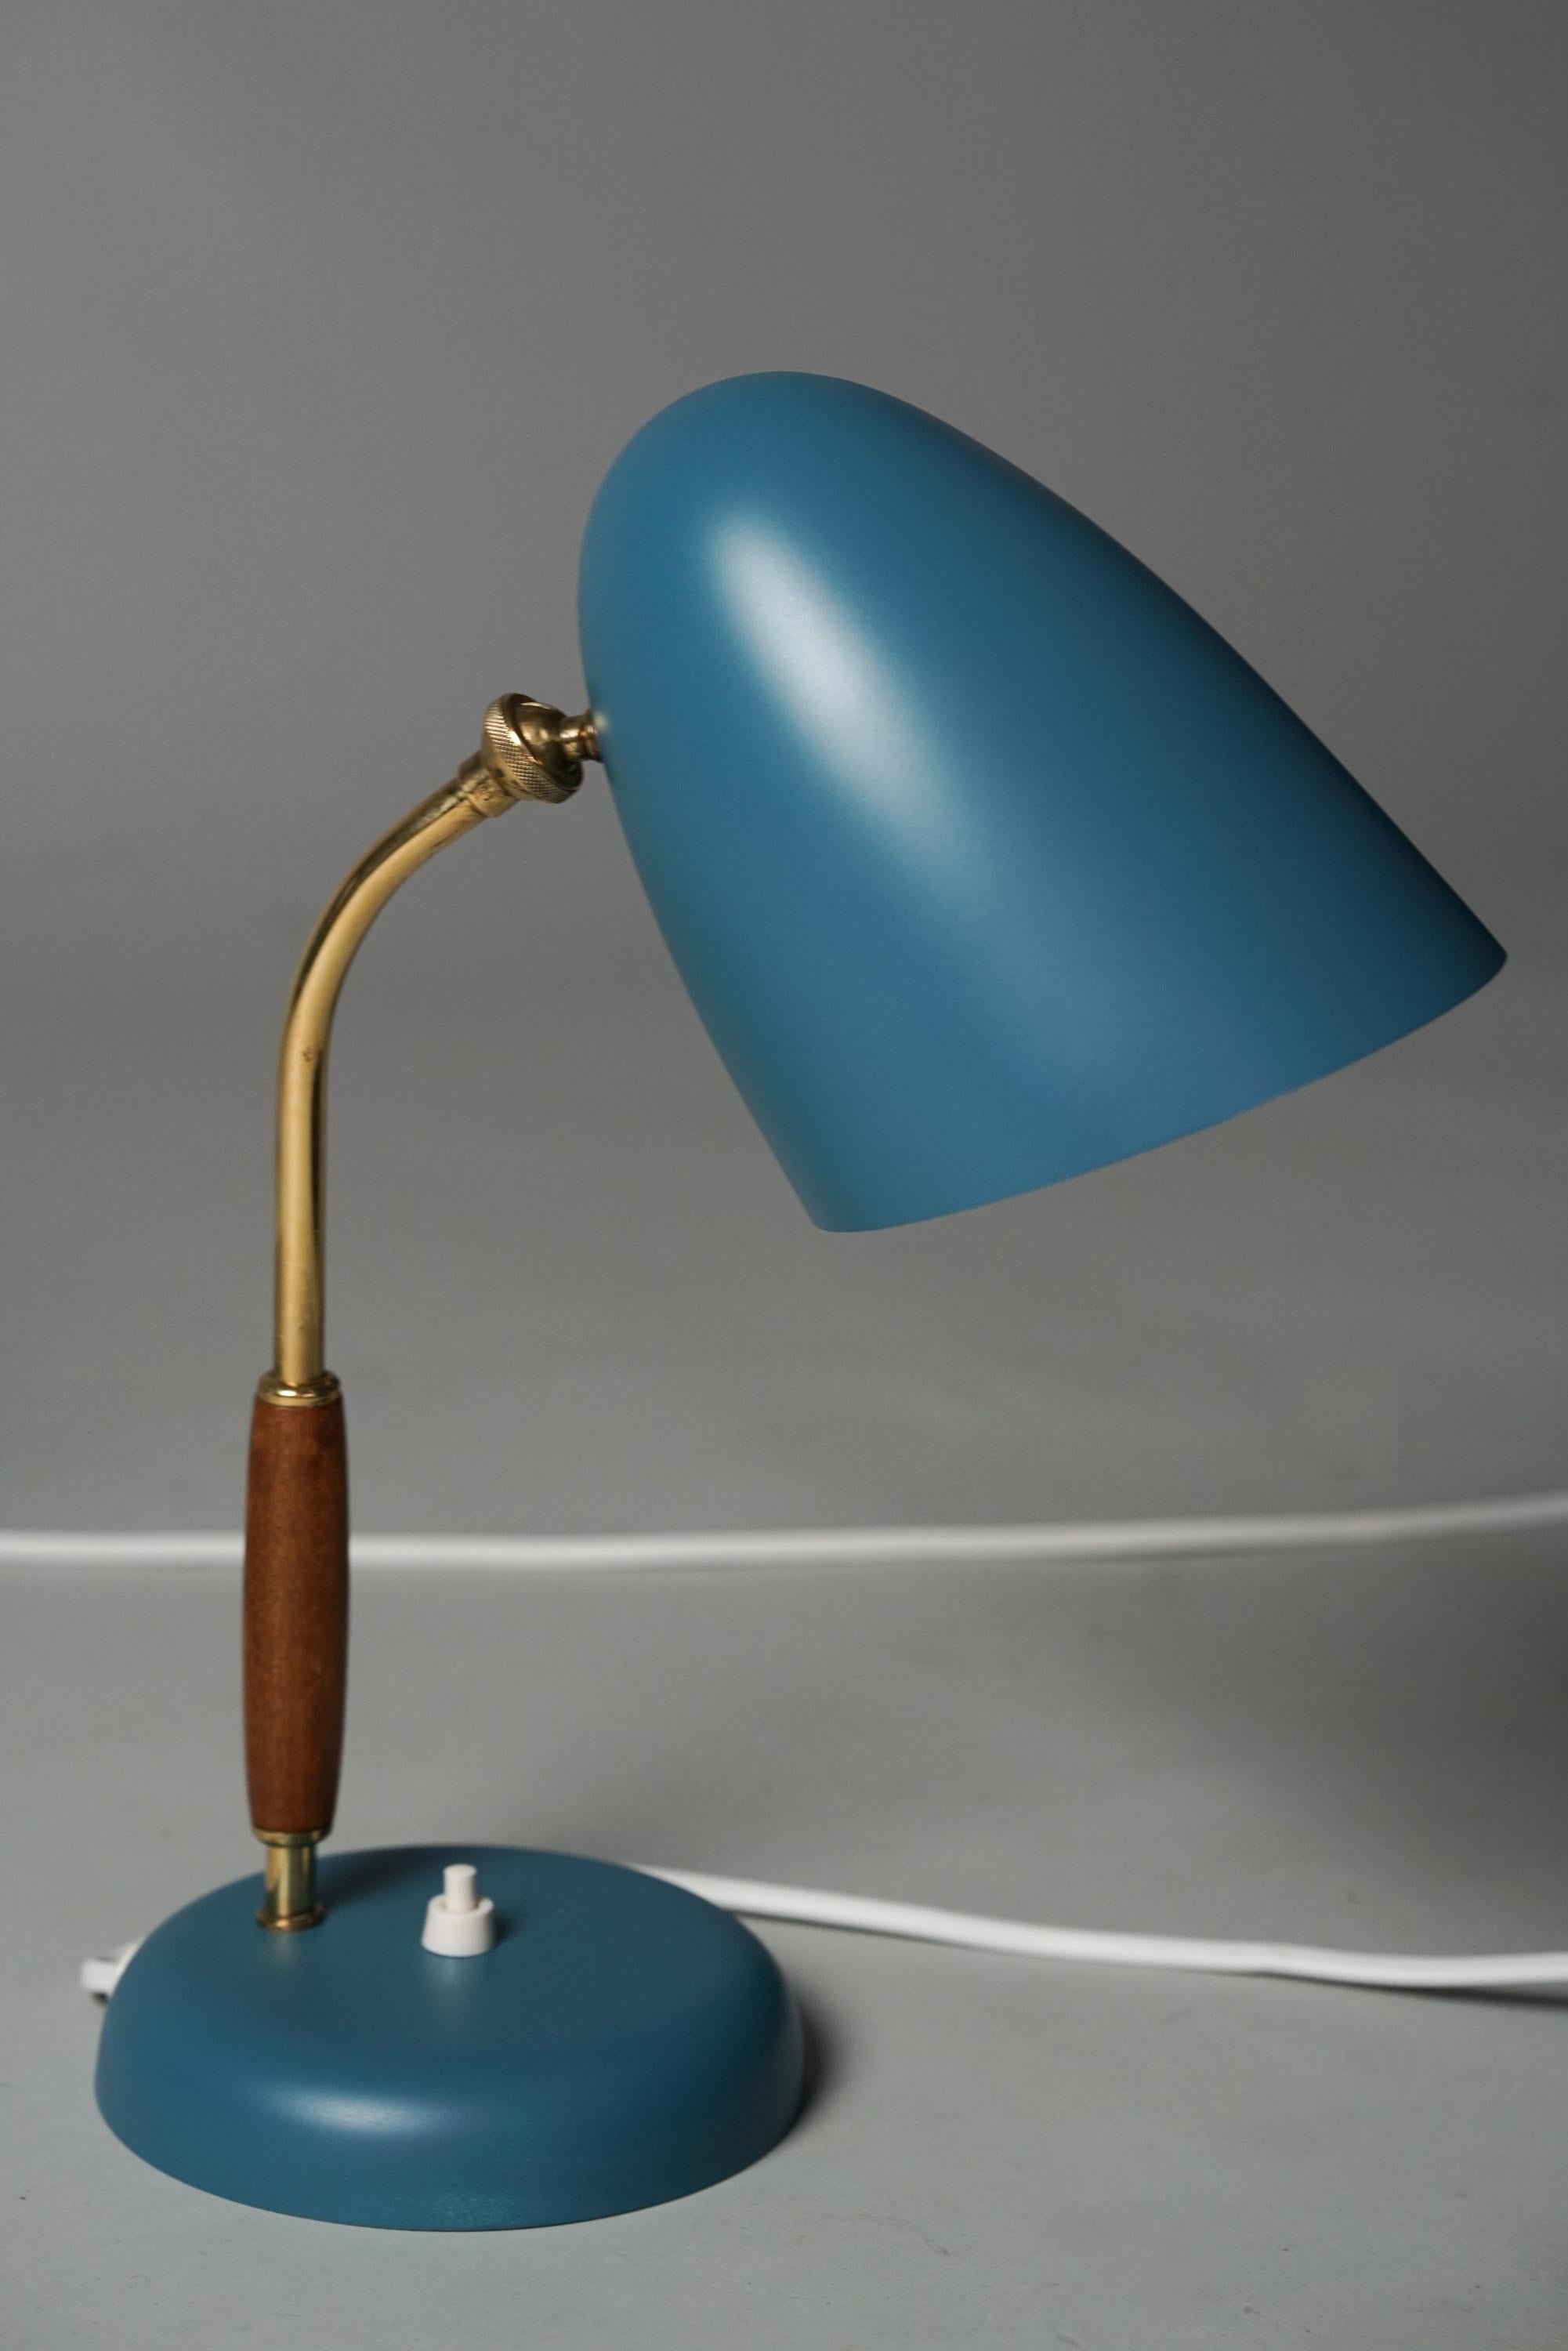 Scandinavian Modern Pair of Table Lamps, Attributed to Lisa Johansson-Pape, Oy Stockmann AB, 1950s For Sale